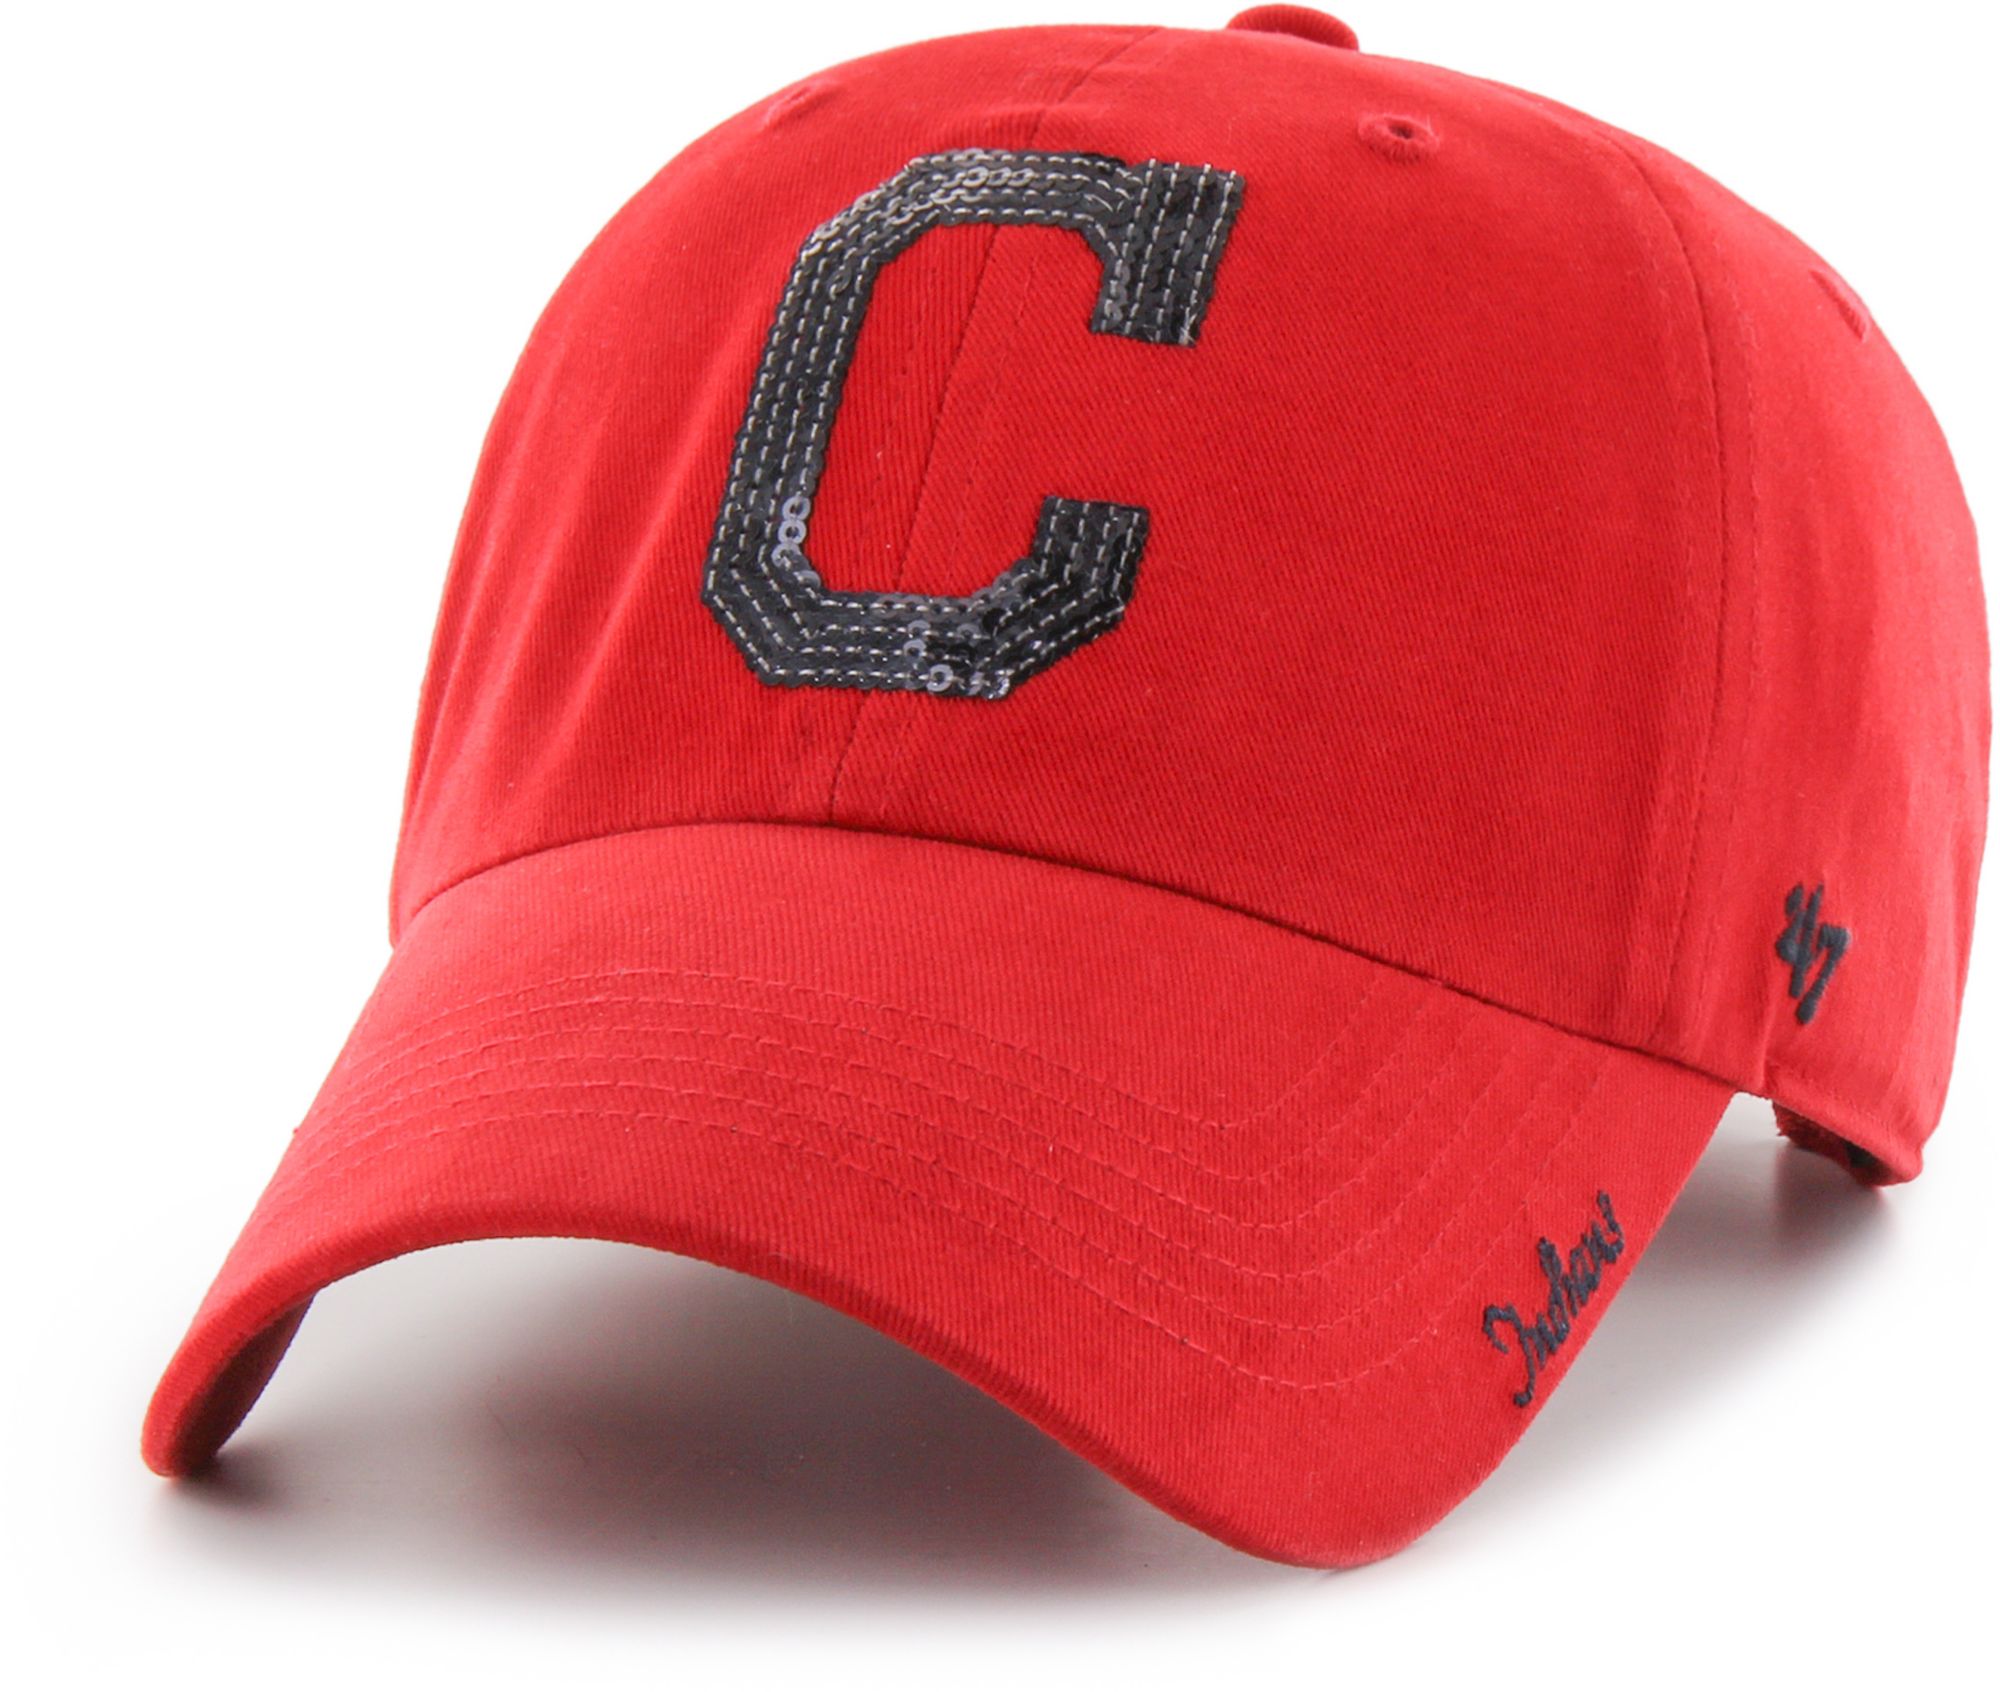 womens cleveland indians